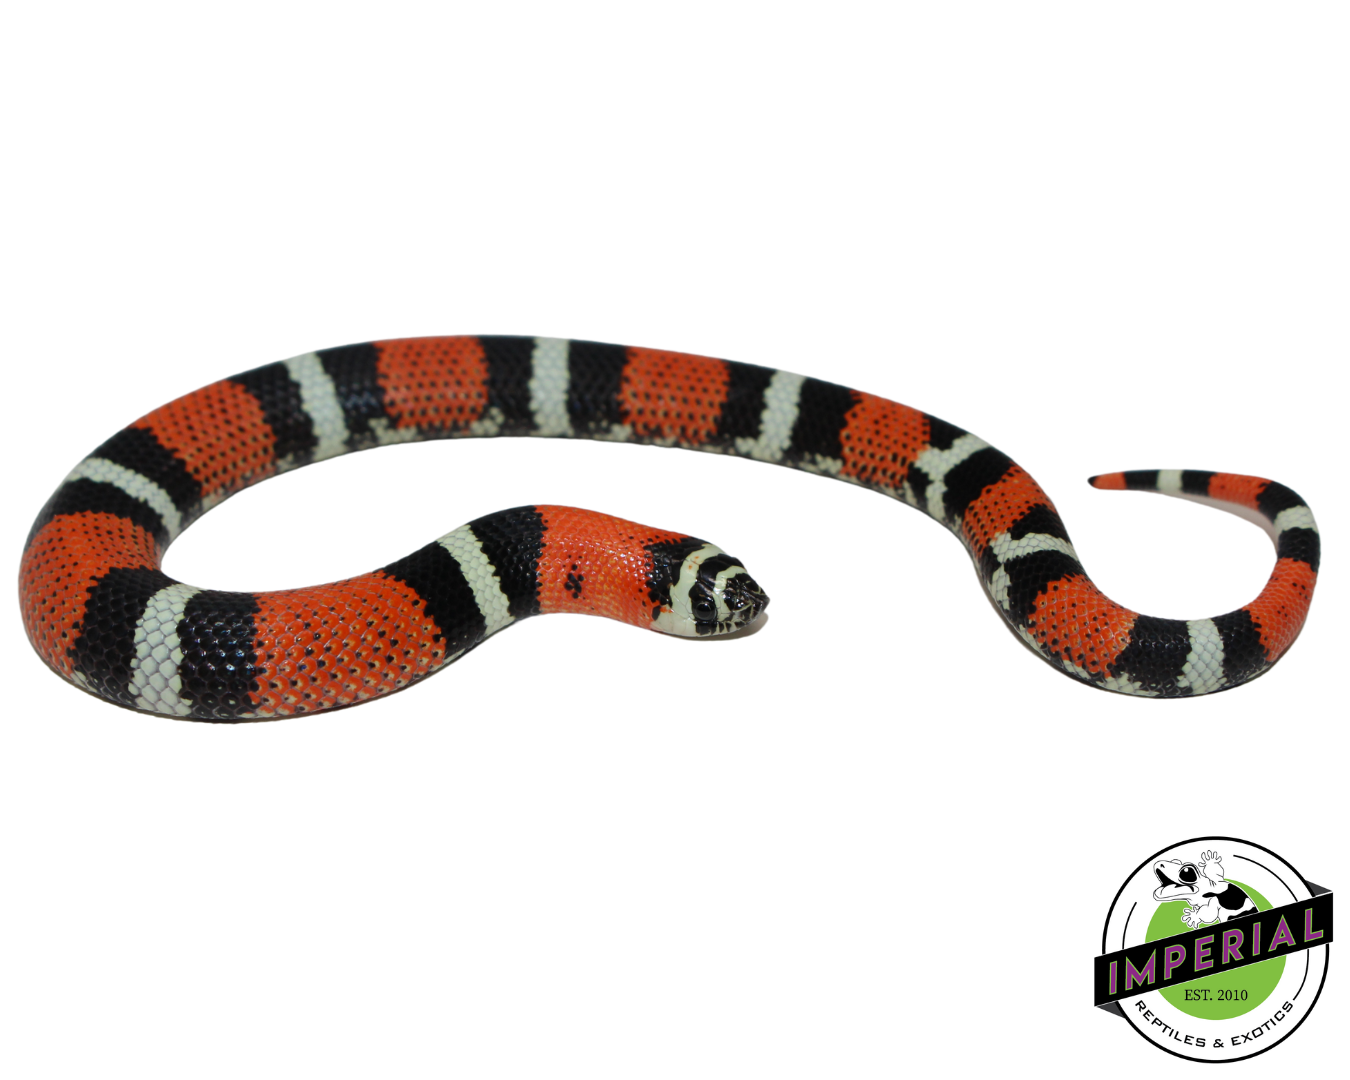 Tri Color Hognose Snake for sale, reptiles for sale, buy reptiles online